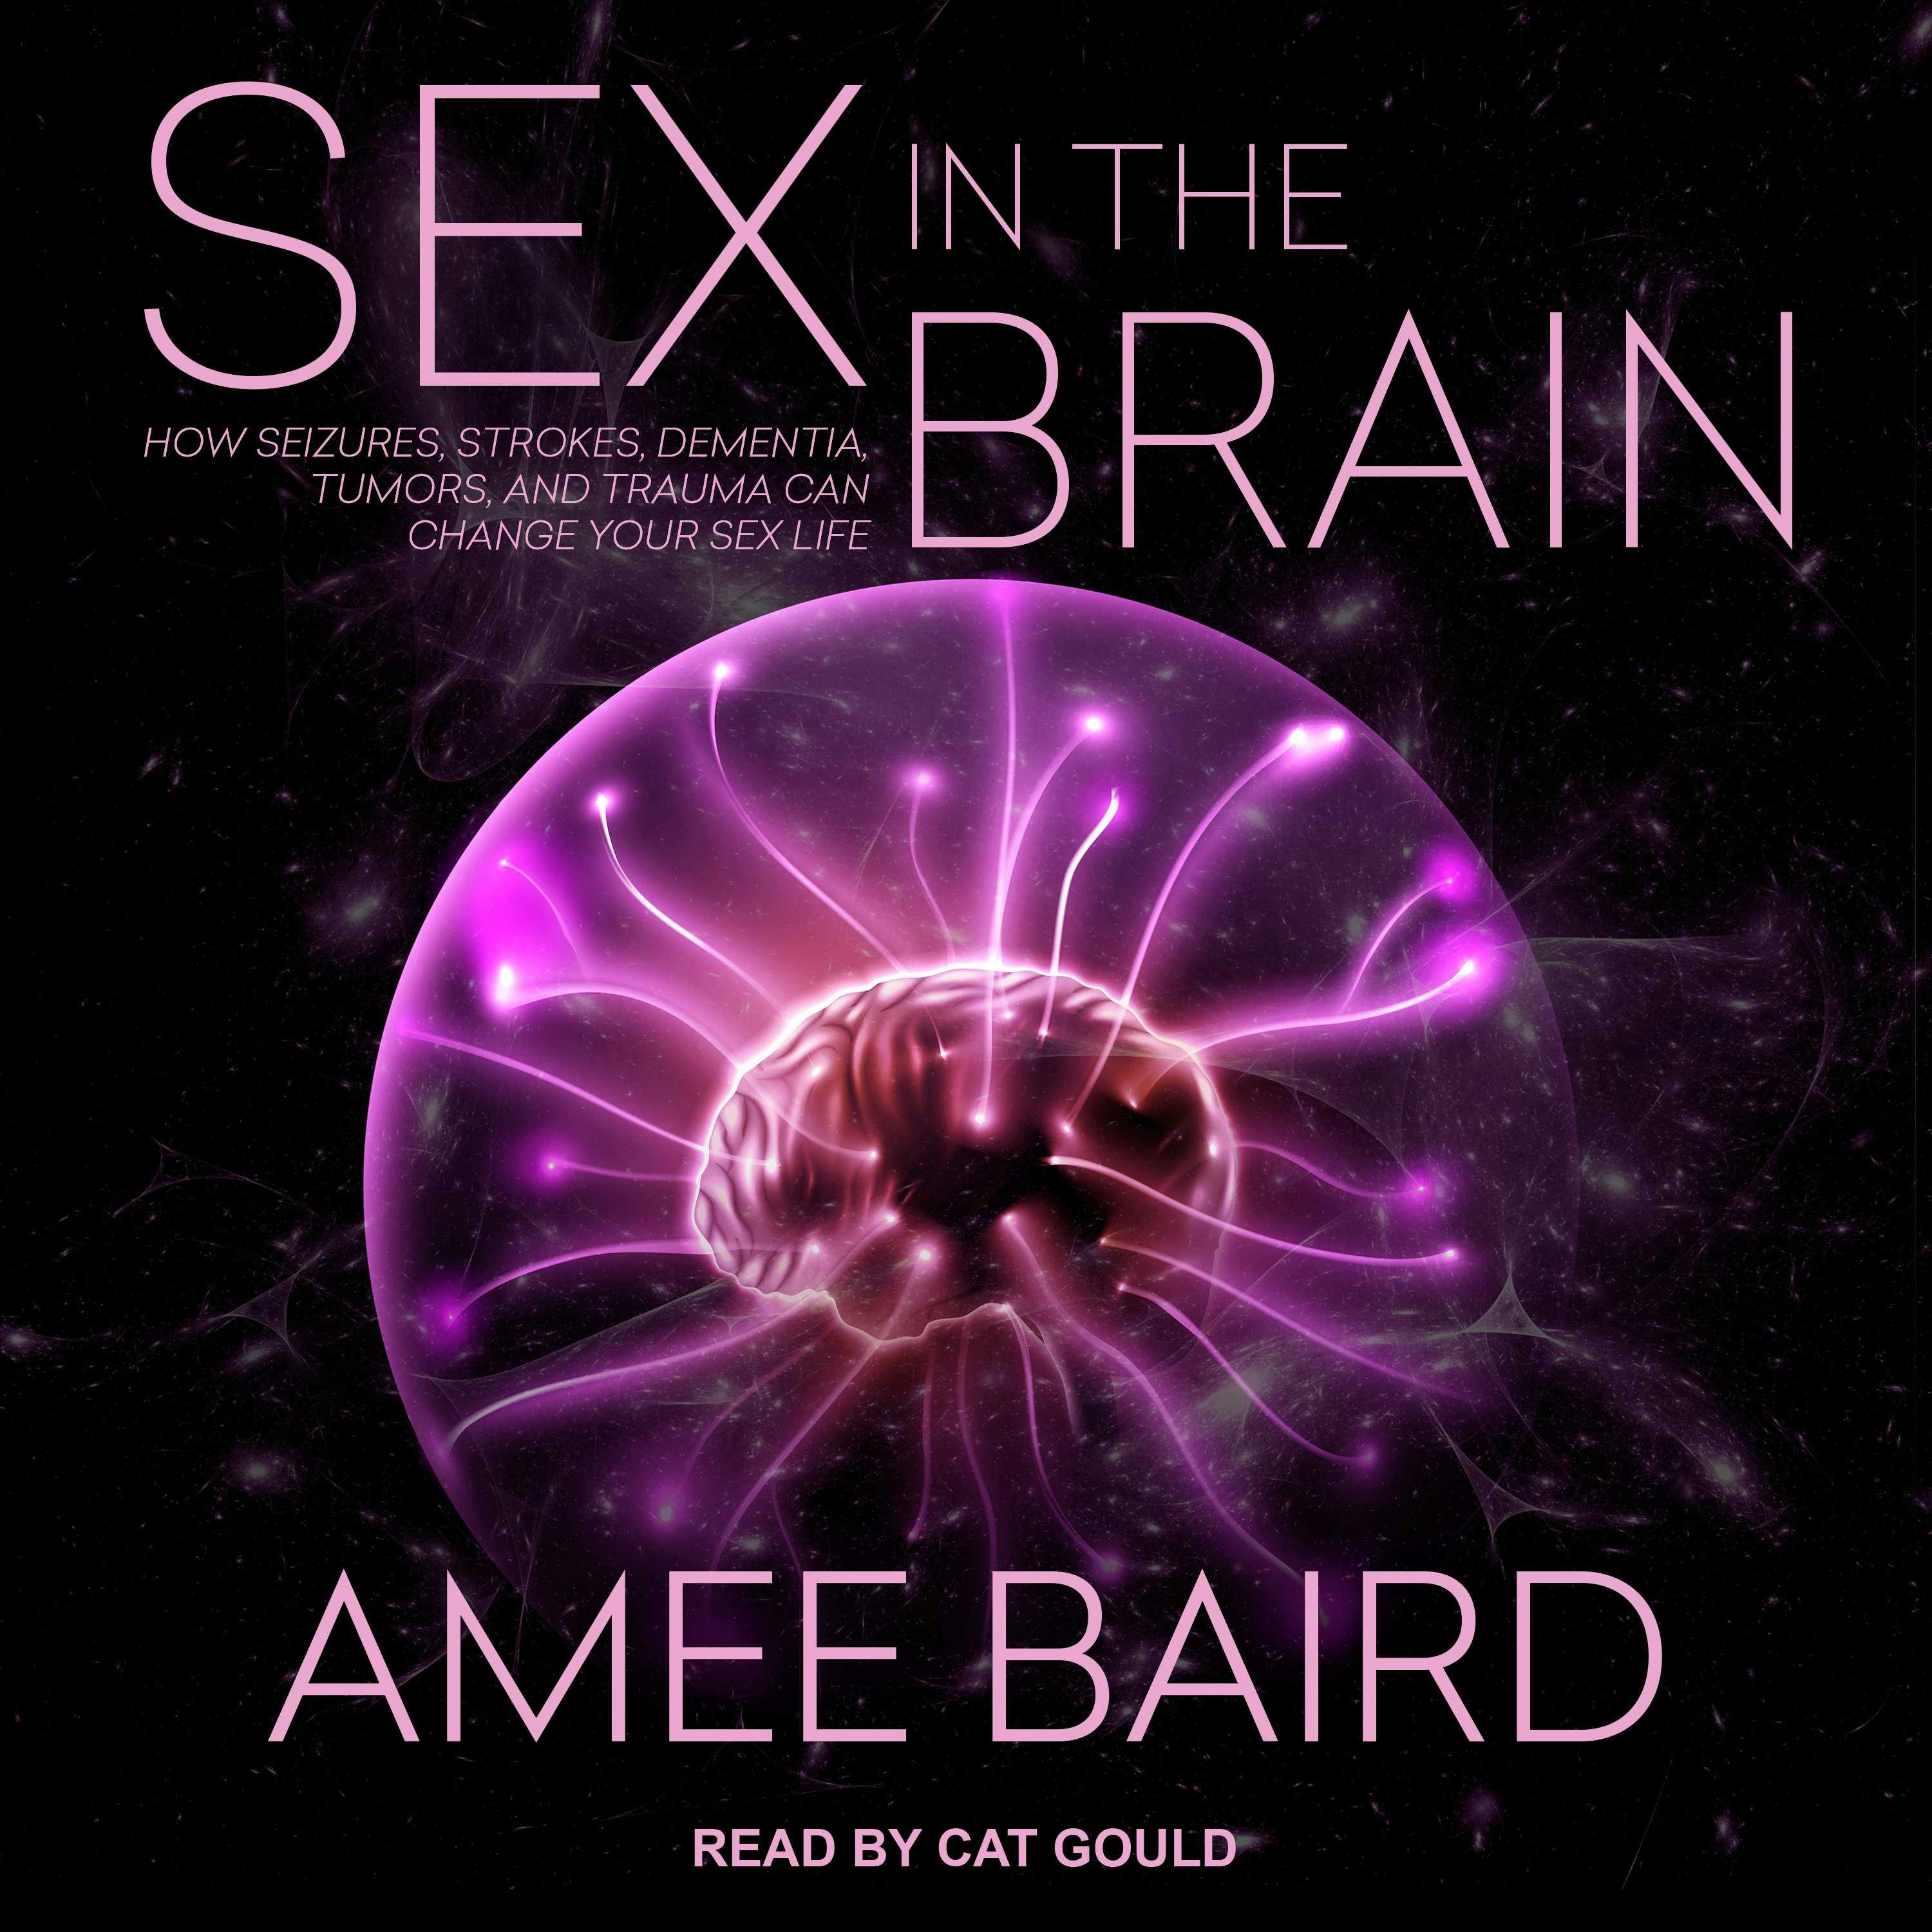 Sex in the Brain: How Seizures, Strokes, Dementia, Tumors, and Trauma Can Change Your Sex Life - Amee Baird